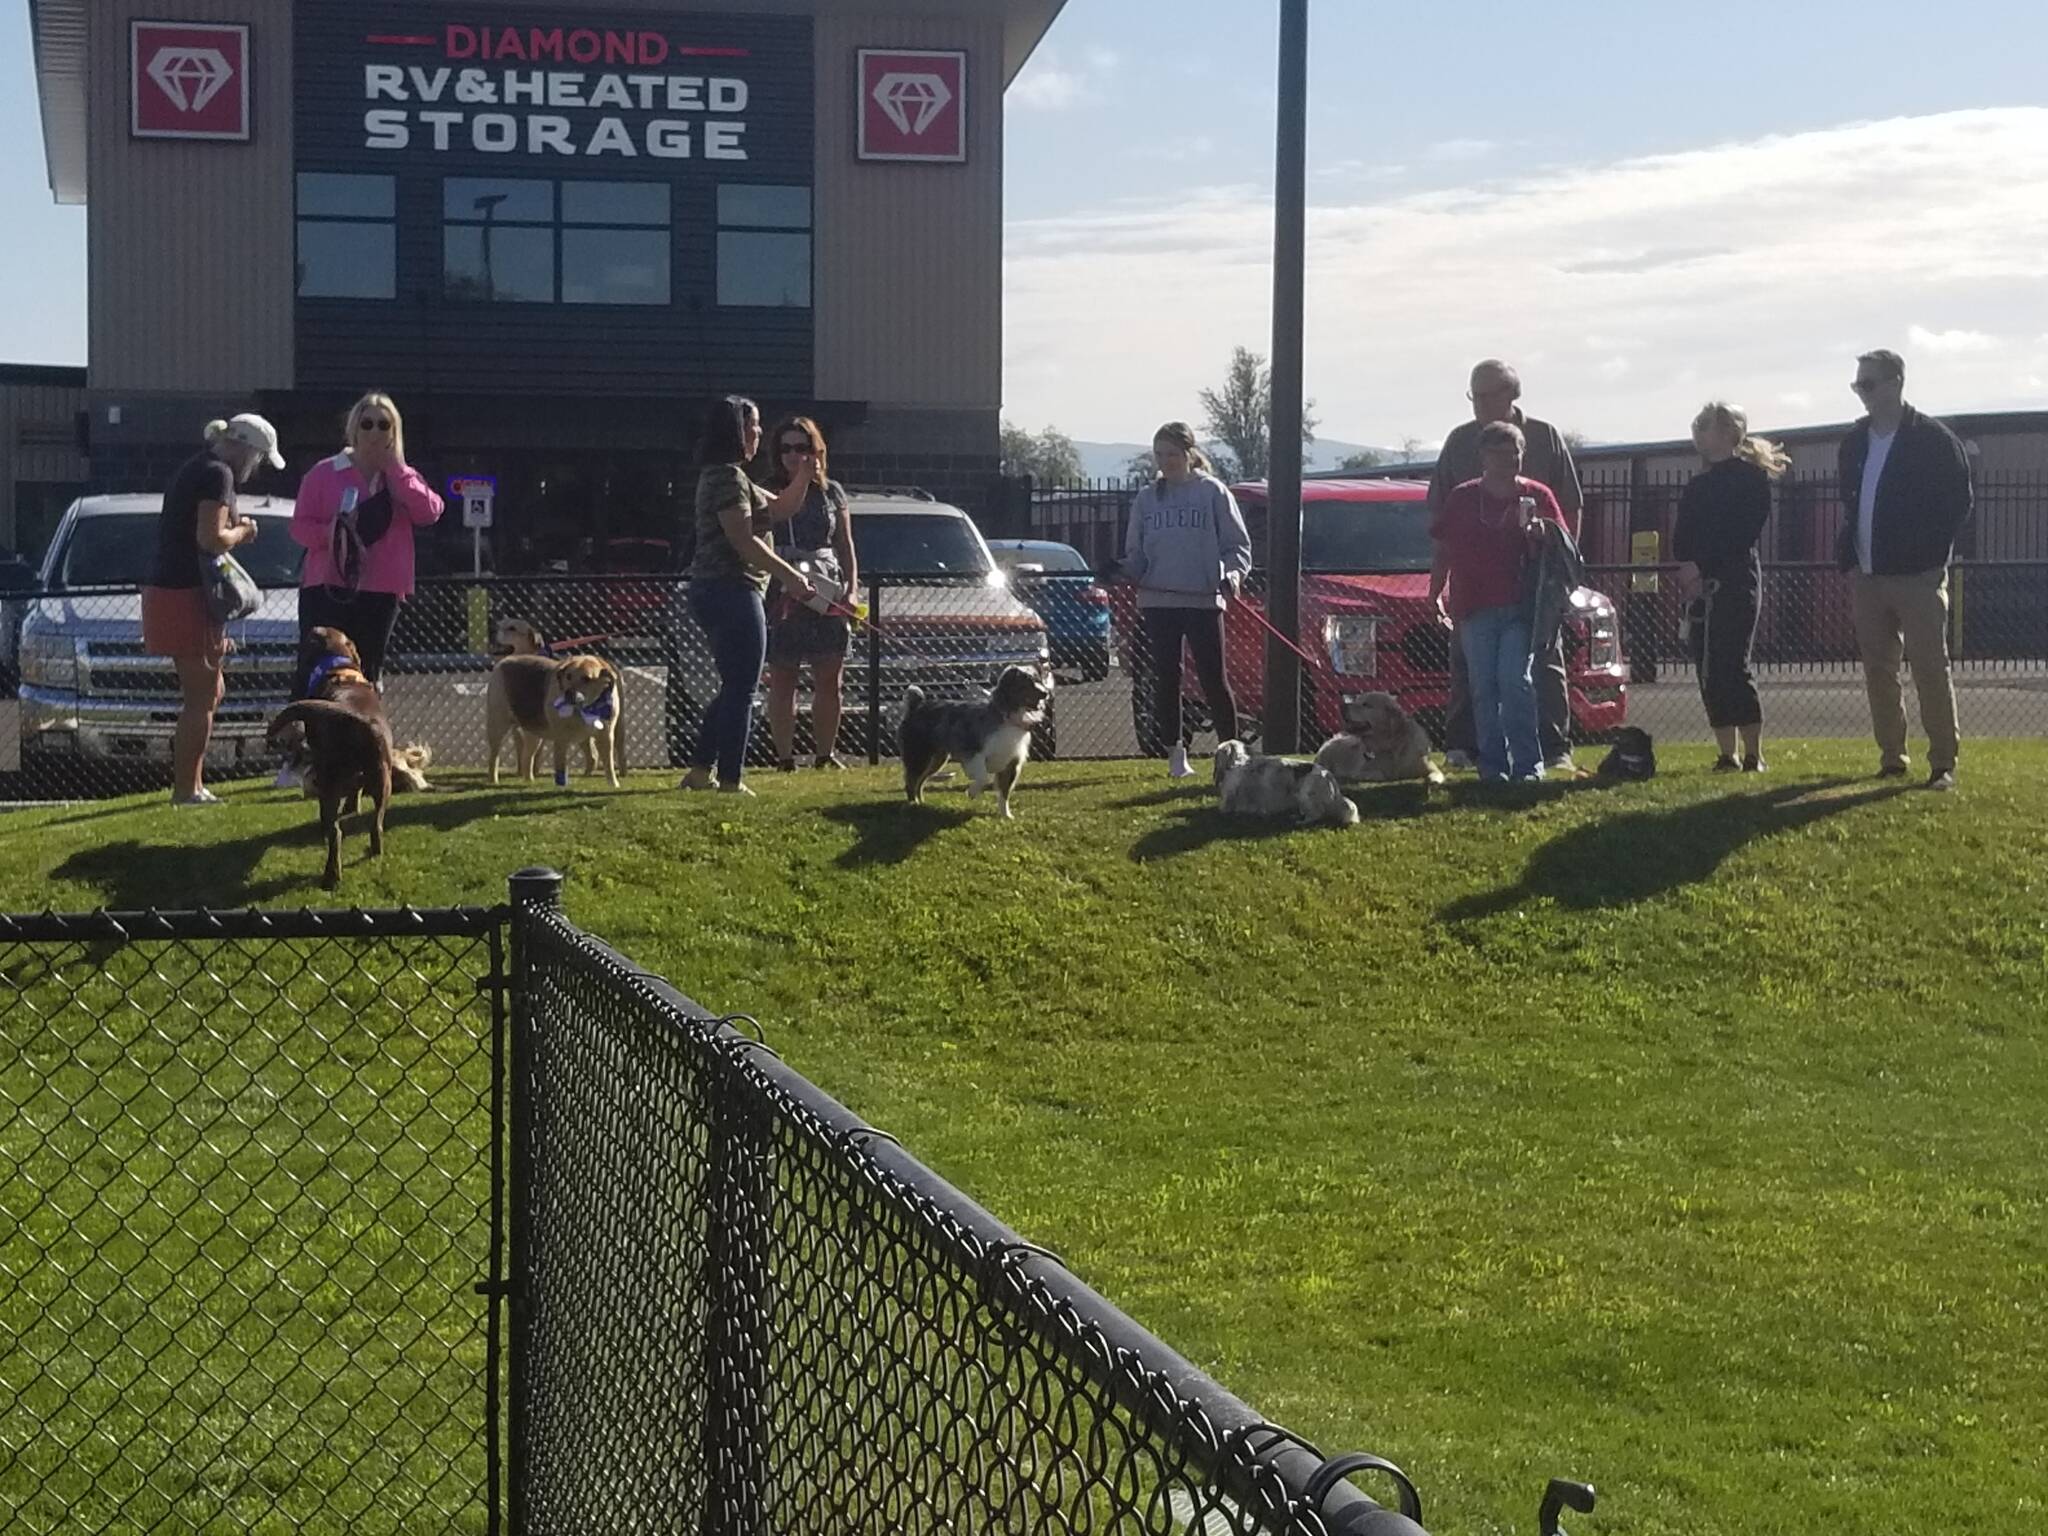 Dozens of dogs and their owners could be seen enjoying the fully fenced field during the grand opening of the Martin Family Dog Park on Saturday, Sept. 24, in Elma. Dogs do not have wear a leash while on the field and is free for everyone to enjoy.